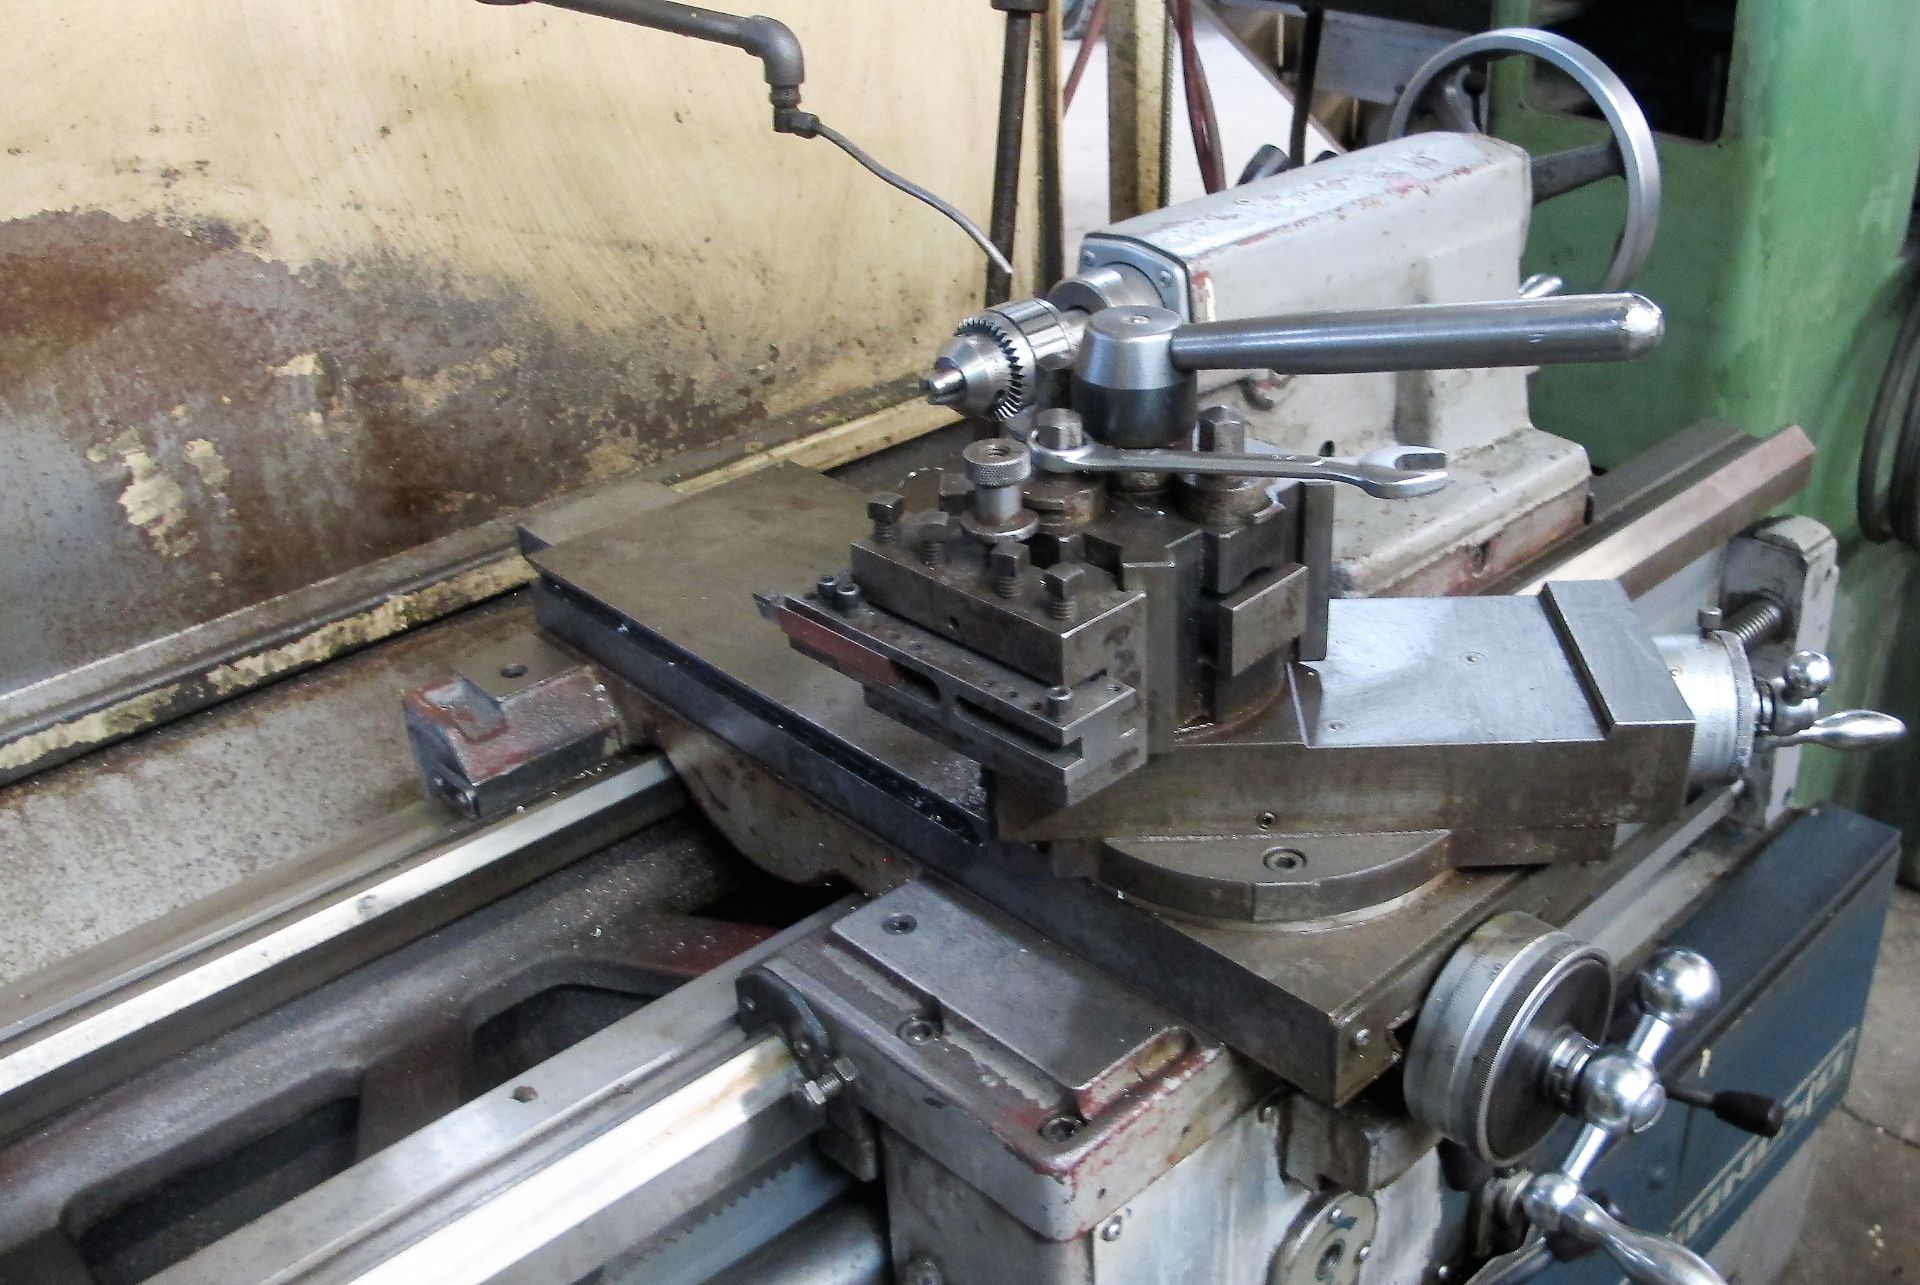 HOWA SANGYO 1000 ENGINE LATHE, S/N 10409, 9" 3-JAW CHUCK, 20" SWING, 54" BED, TAILSTOCK, TOOL - Image 5 of 9